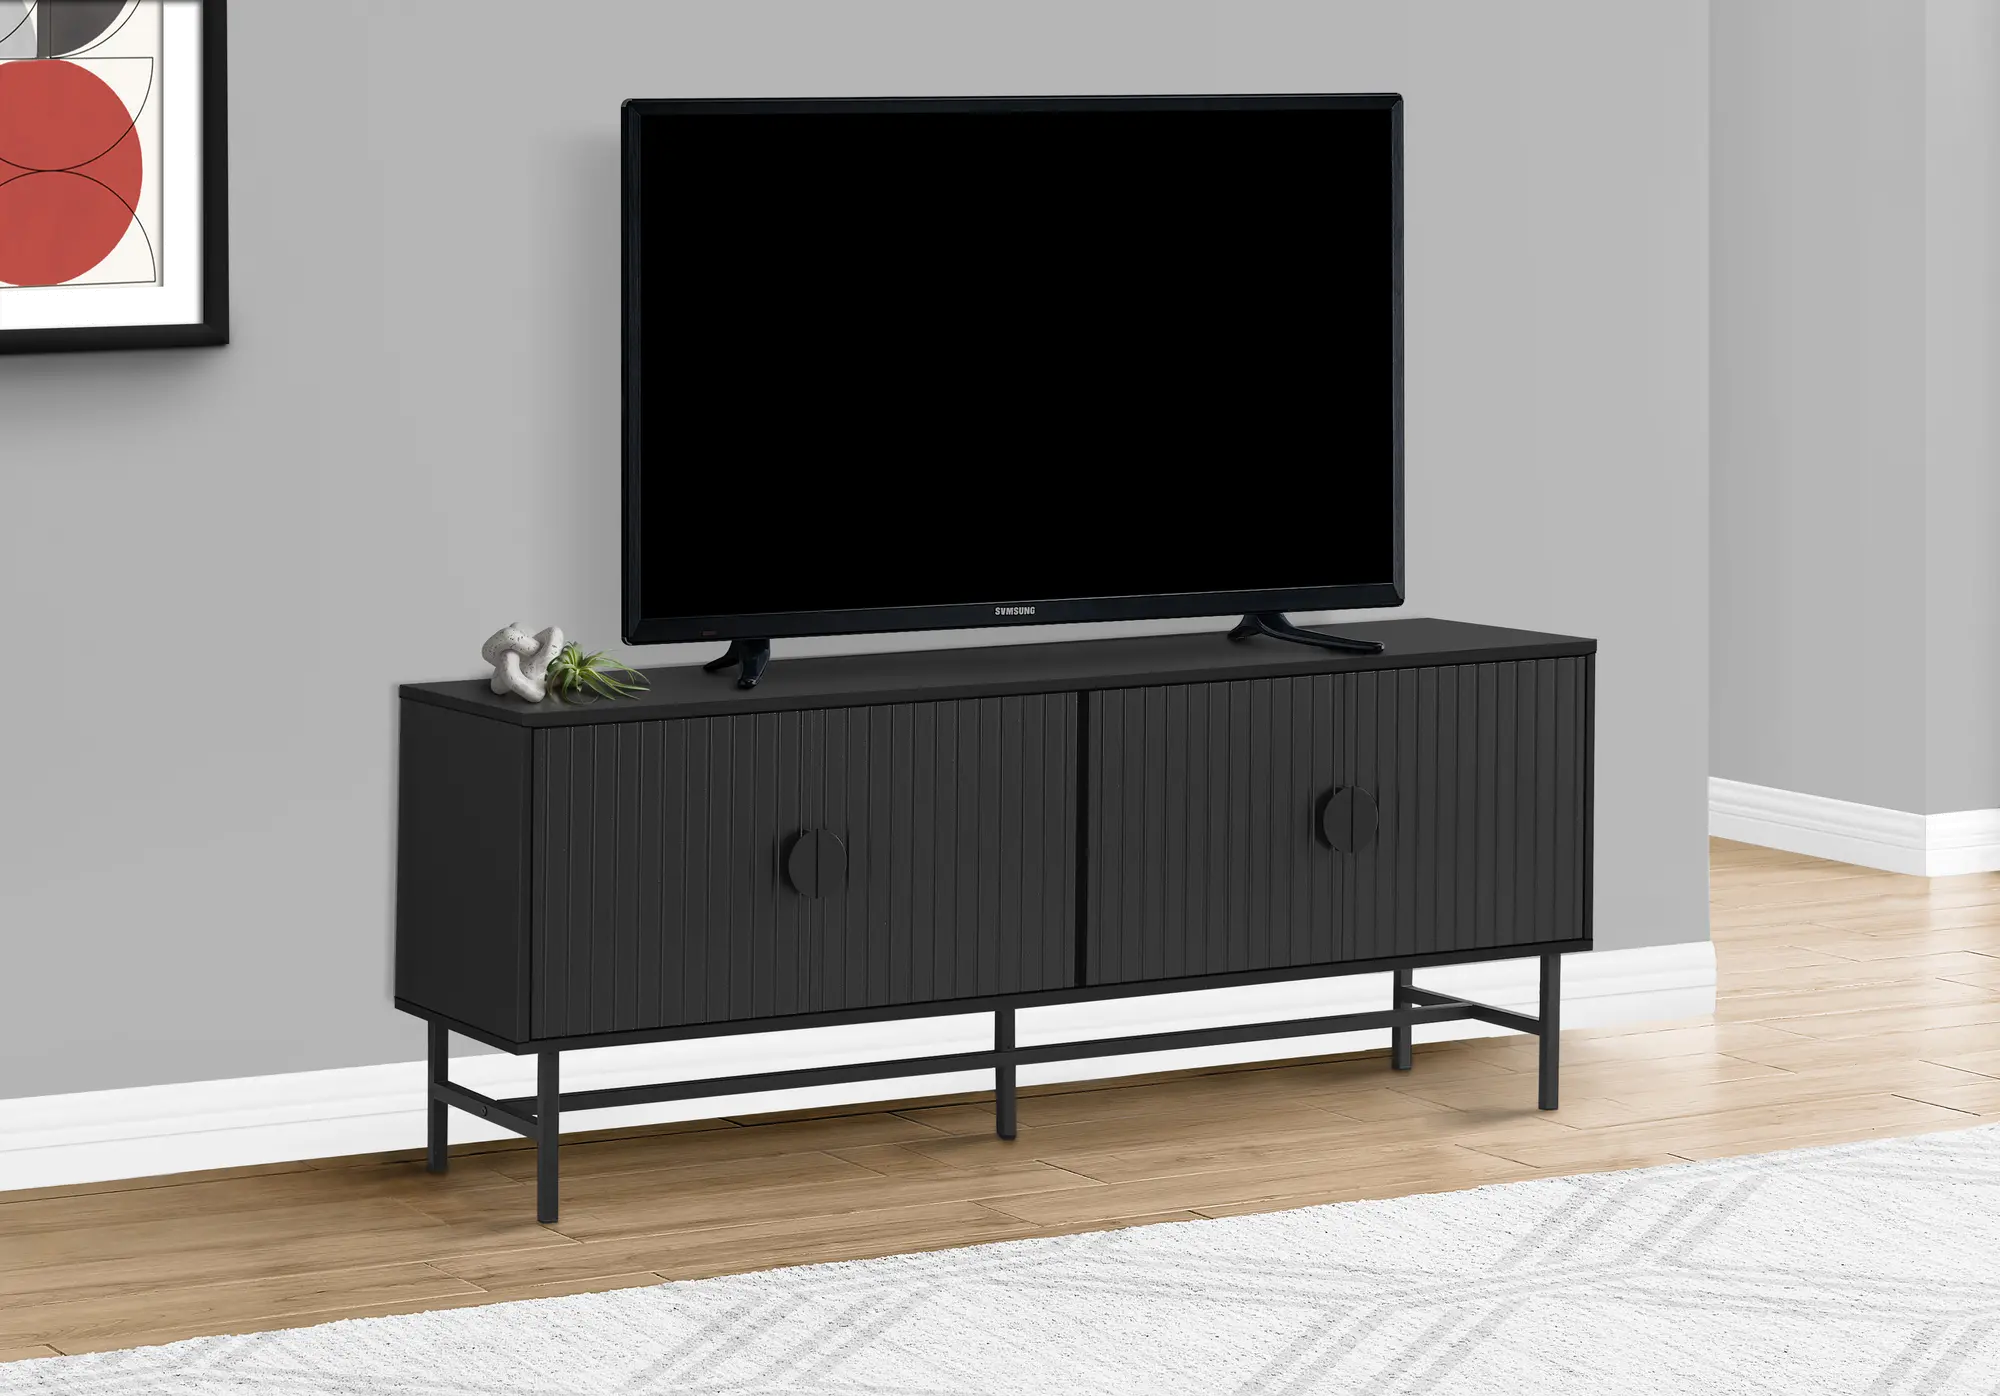 Photos - Mount/Stand Monarch Specialties Maeve Black 60" TV stand I 2733 